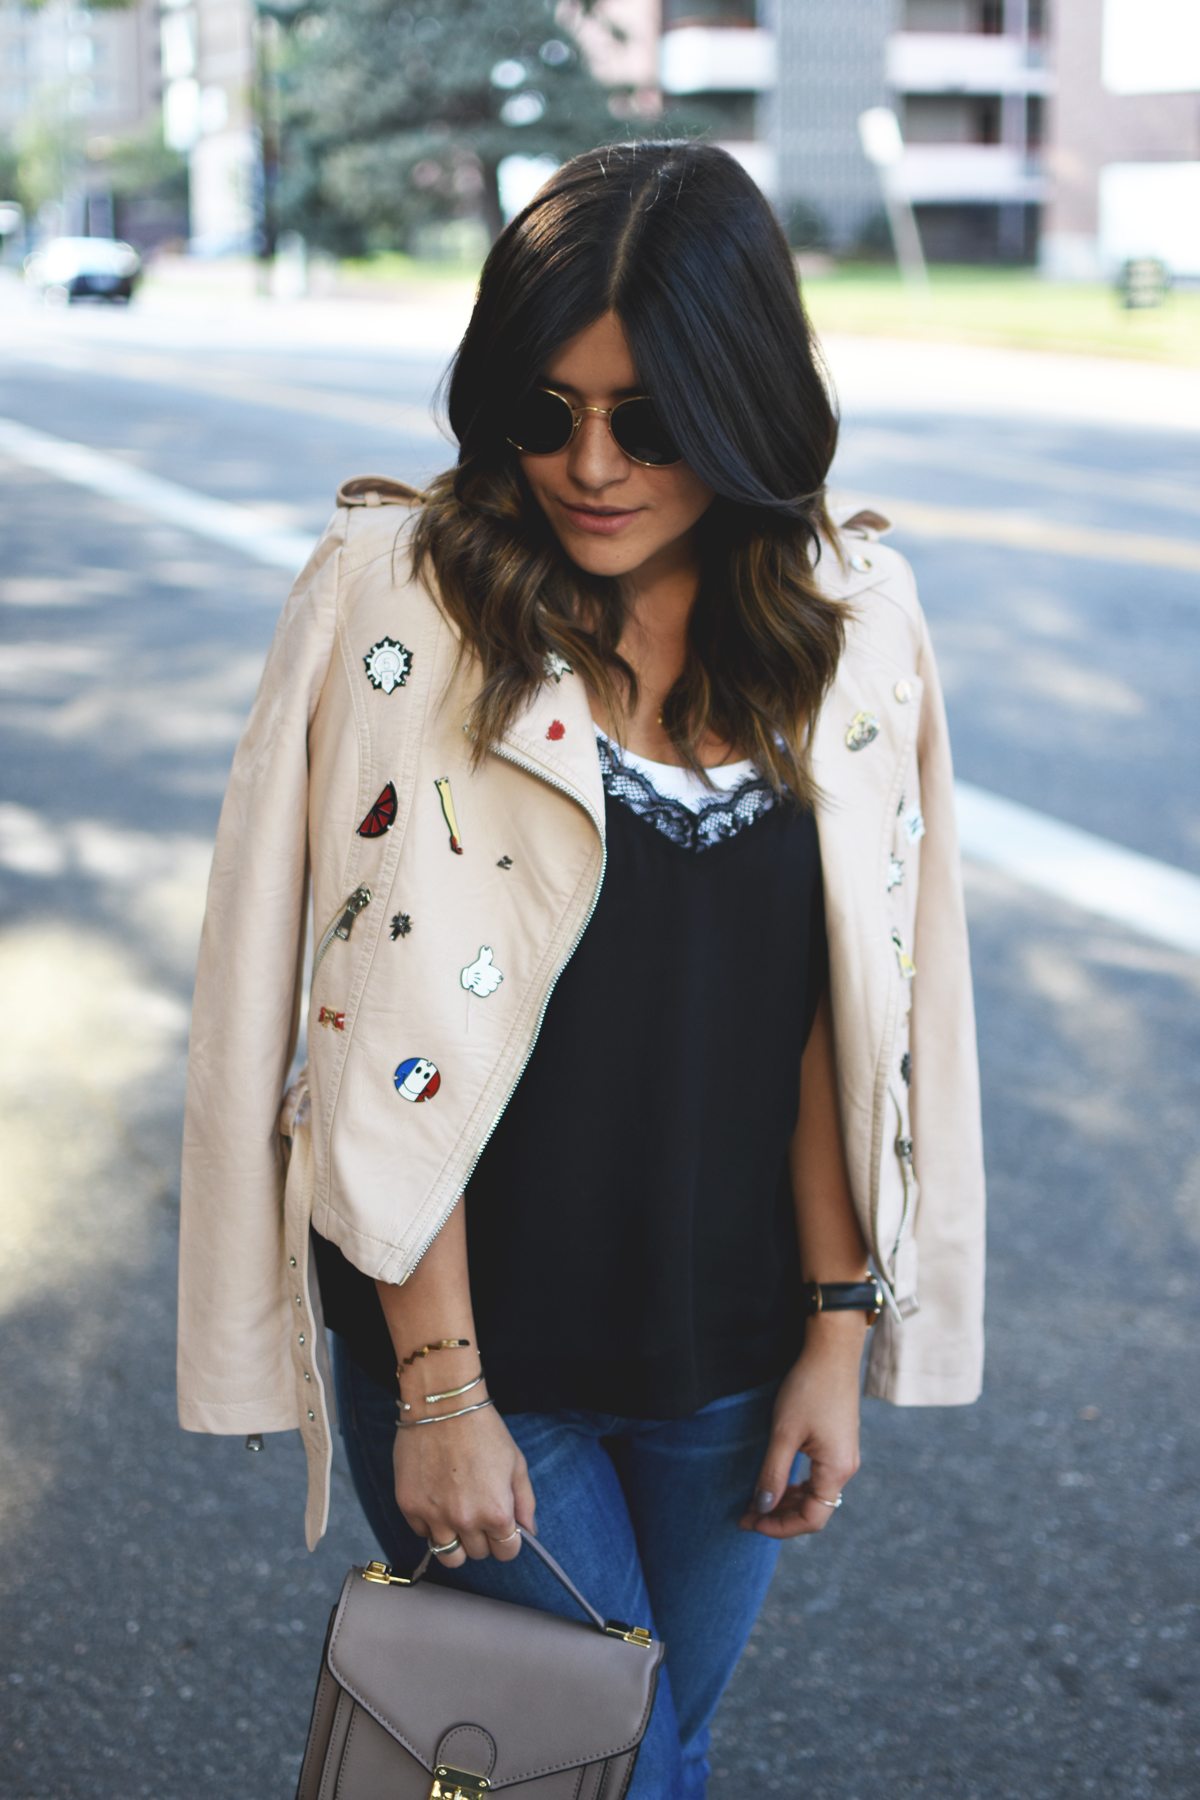 Carolina Hellal of Chic Talk wearing a Dezzal blush faux leather jacket, Forever 21 lace black camisol, Madewell jeans, Rayban rounded sunglasses, and Topshop blush lace up sandals.